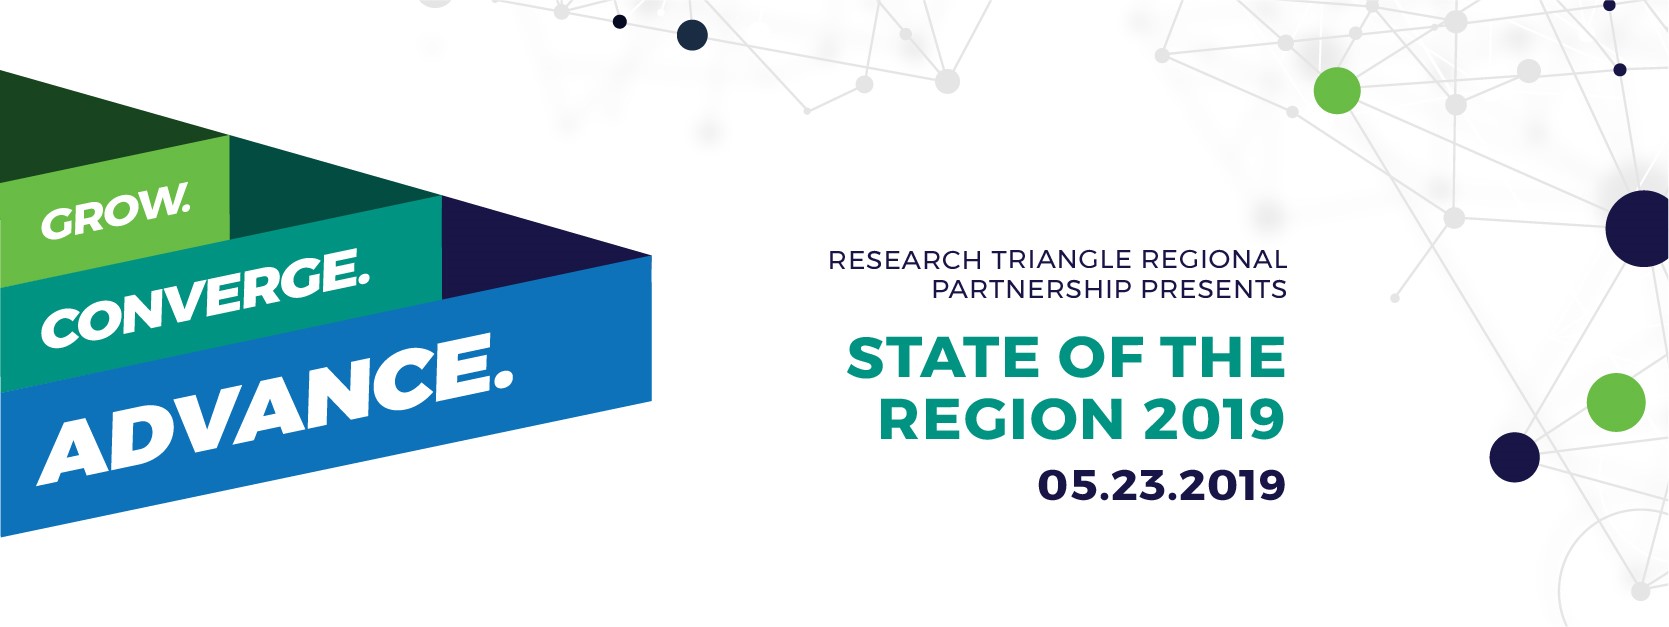 State of the Region 2019